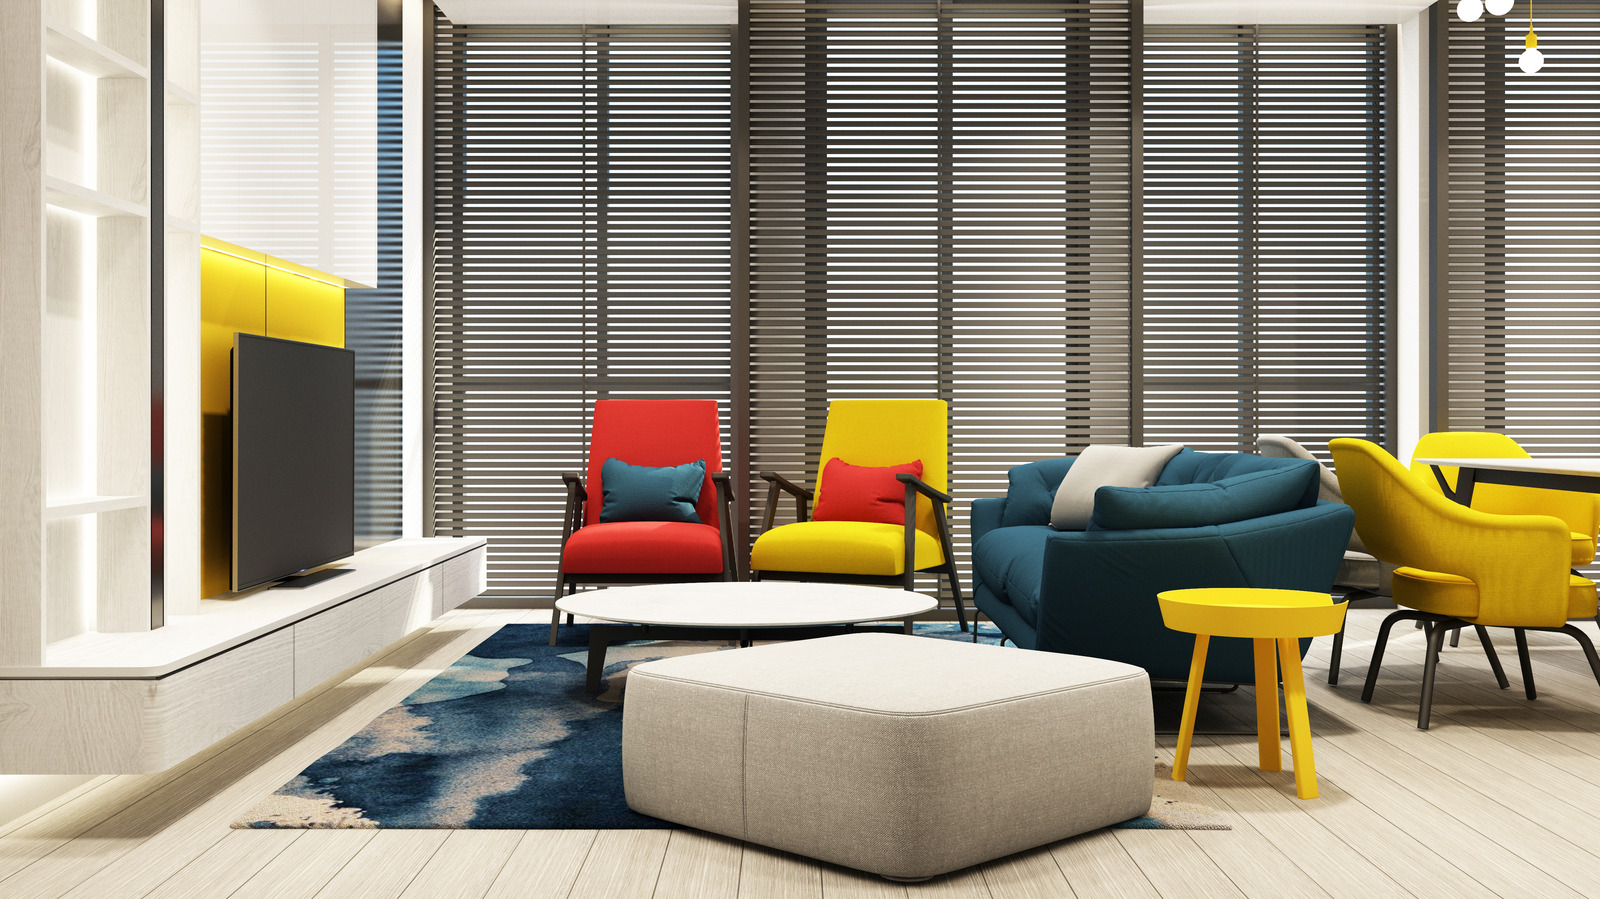 What Is A Triadic Color Scheme And How Can You Use It In Your Space